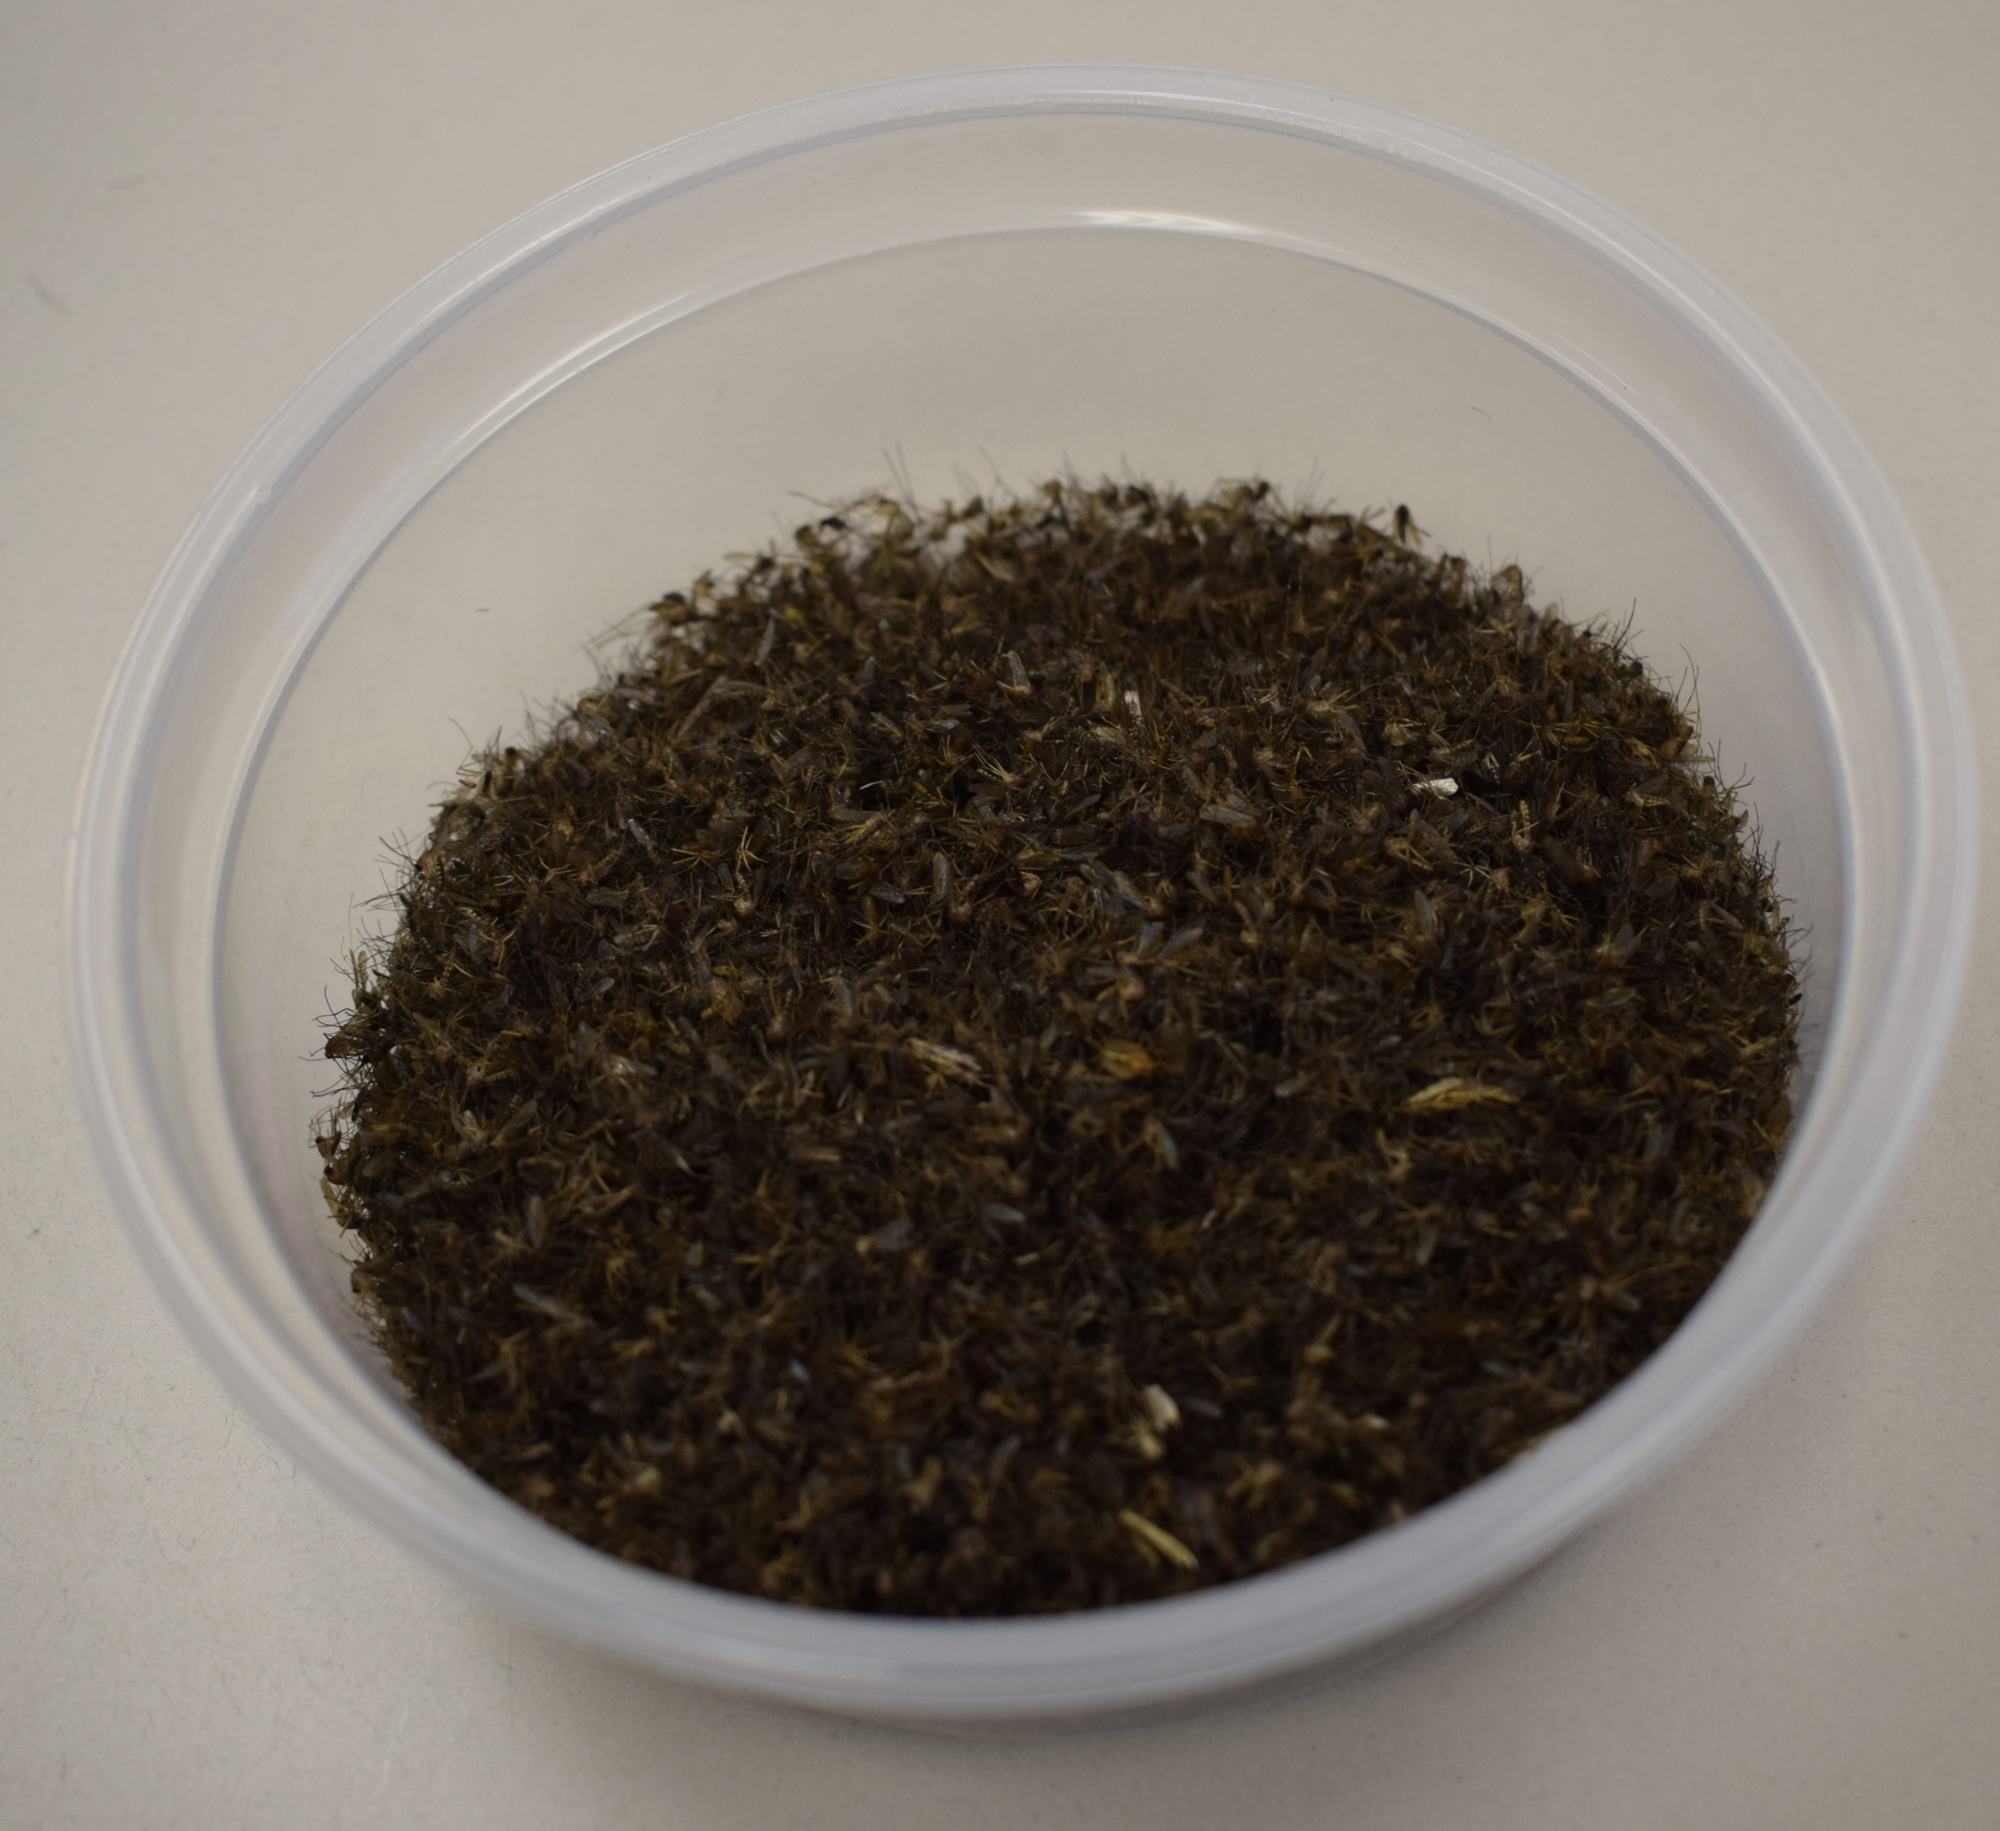 An 8-ounce container in the district's Palmetto facility holds approximately 10,000 dead mosquitos, trapped in one night.